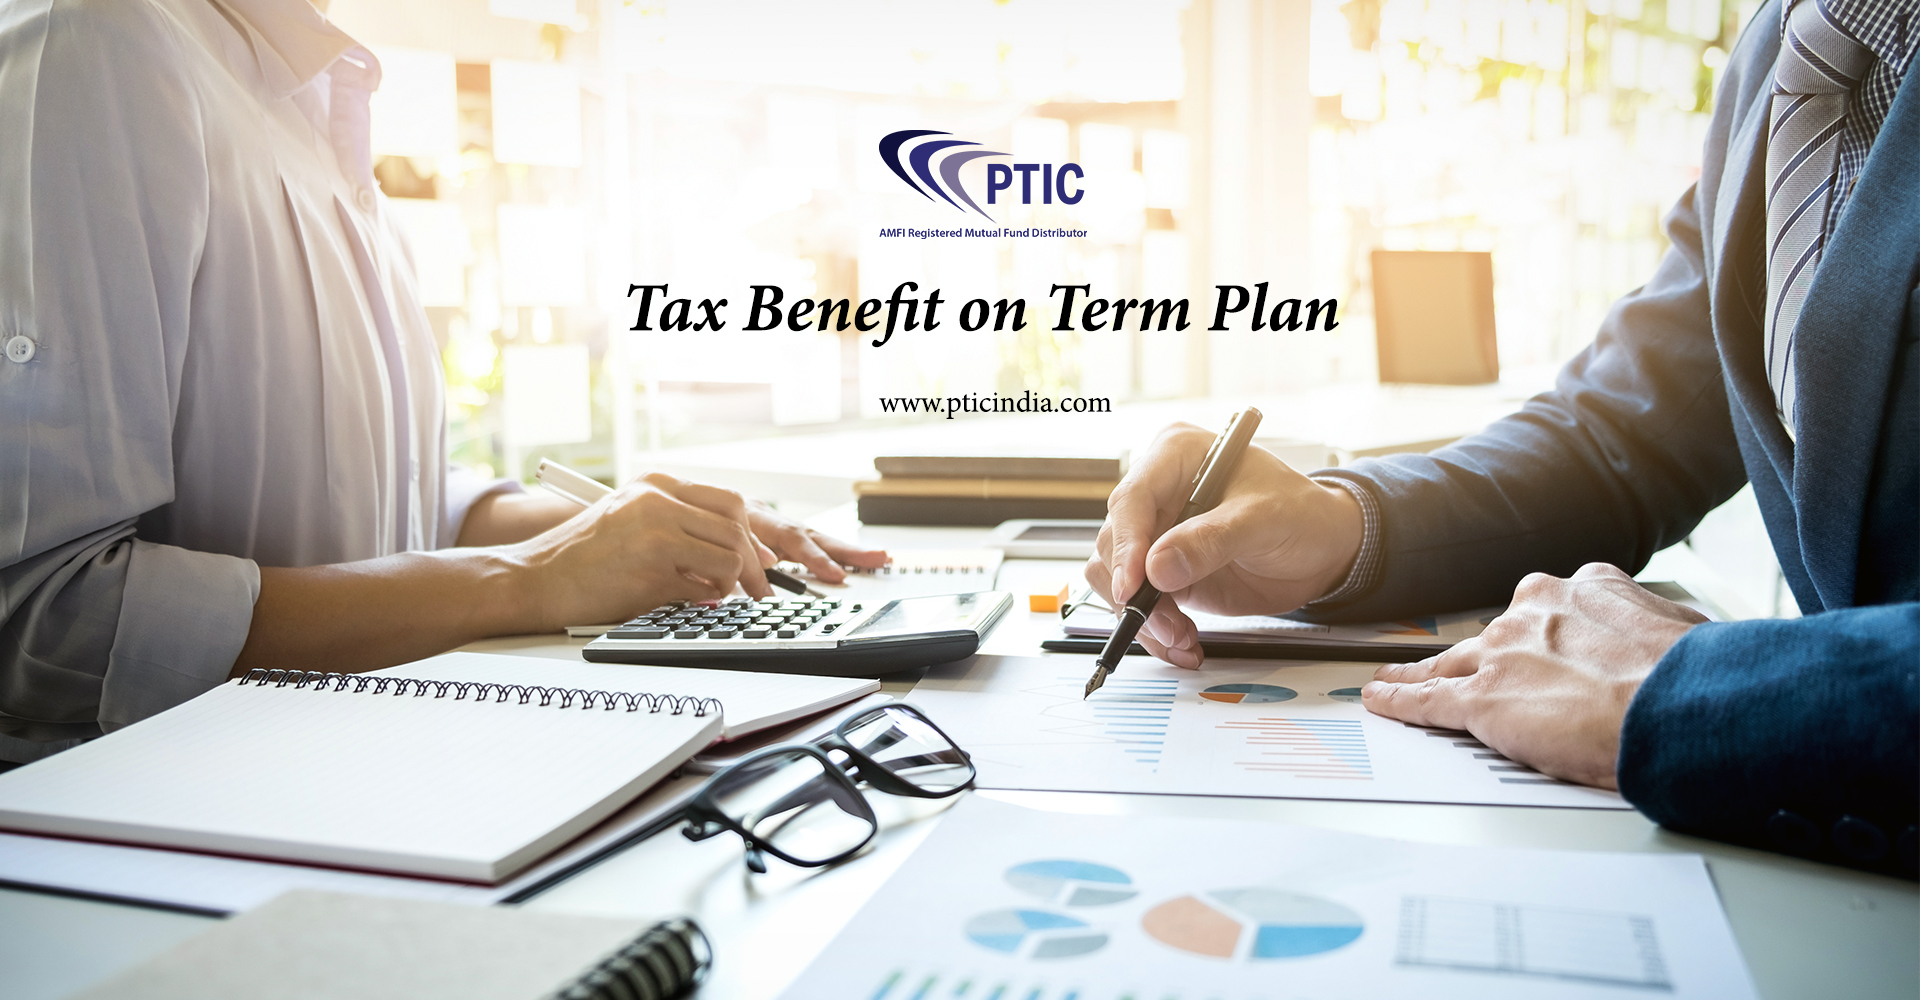 tax-benefit-on-term-plan-ptic-india